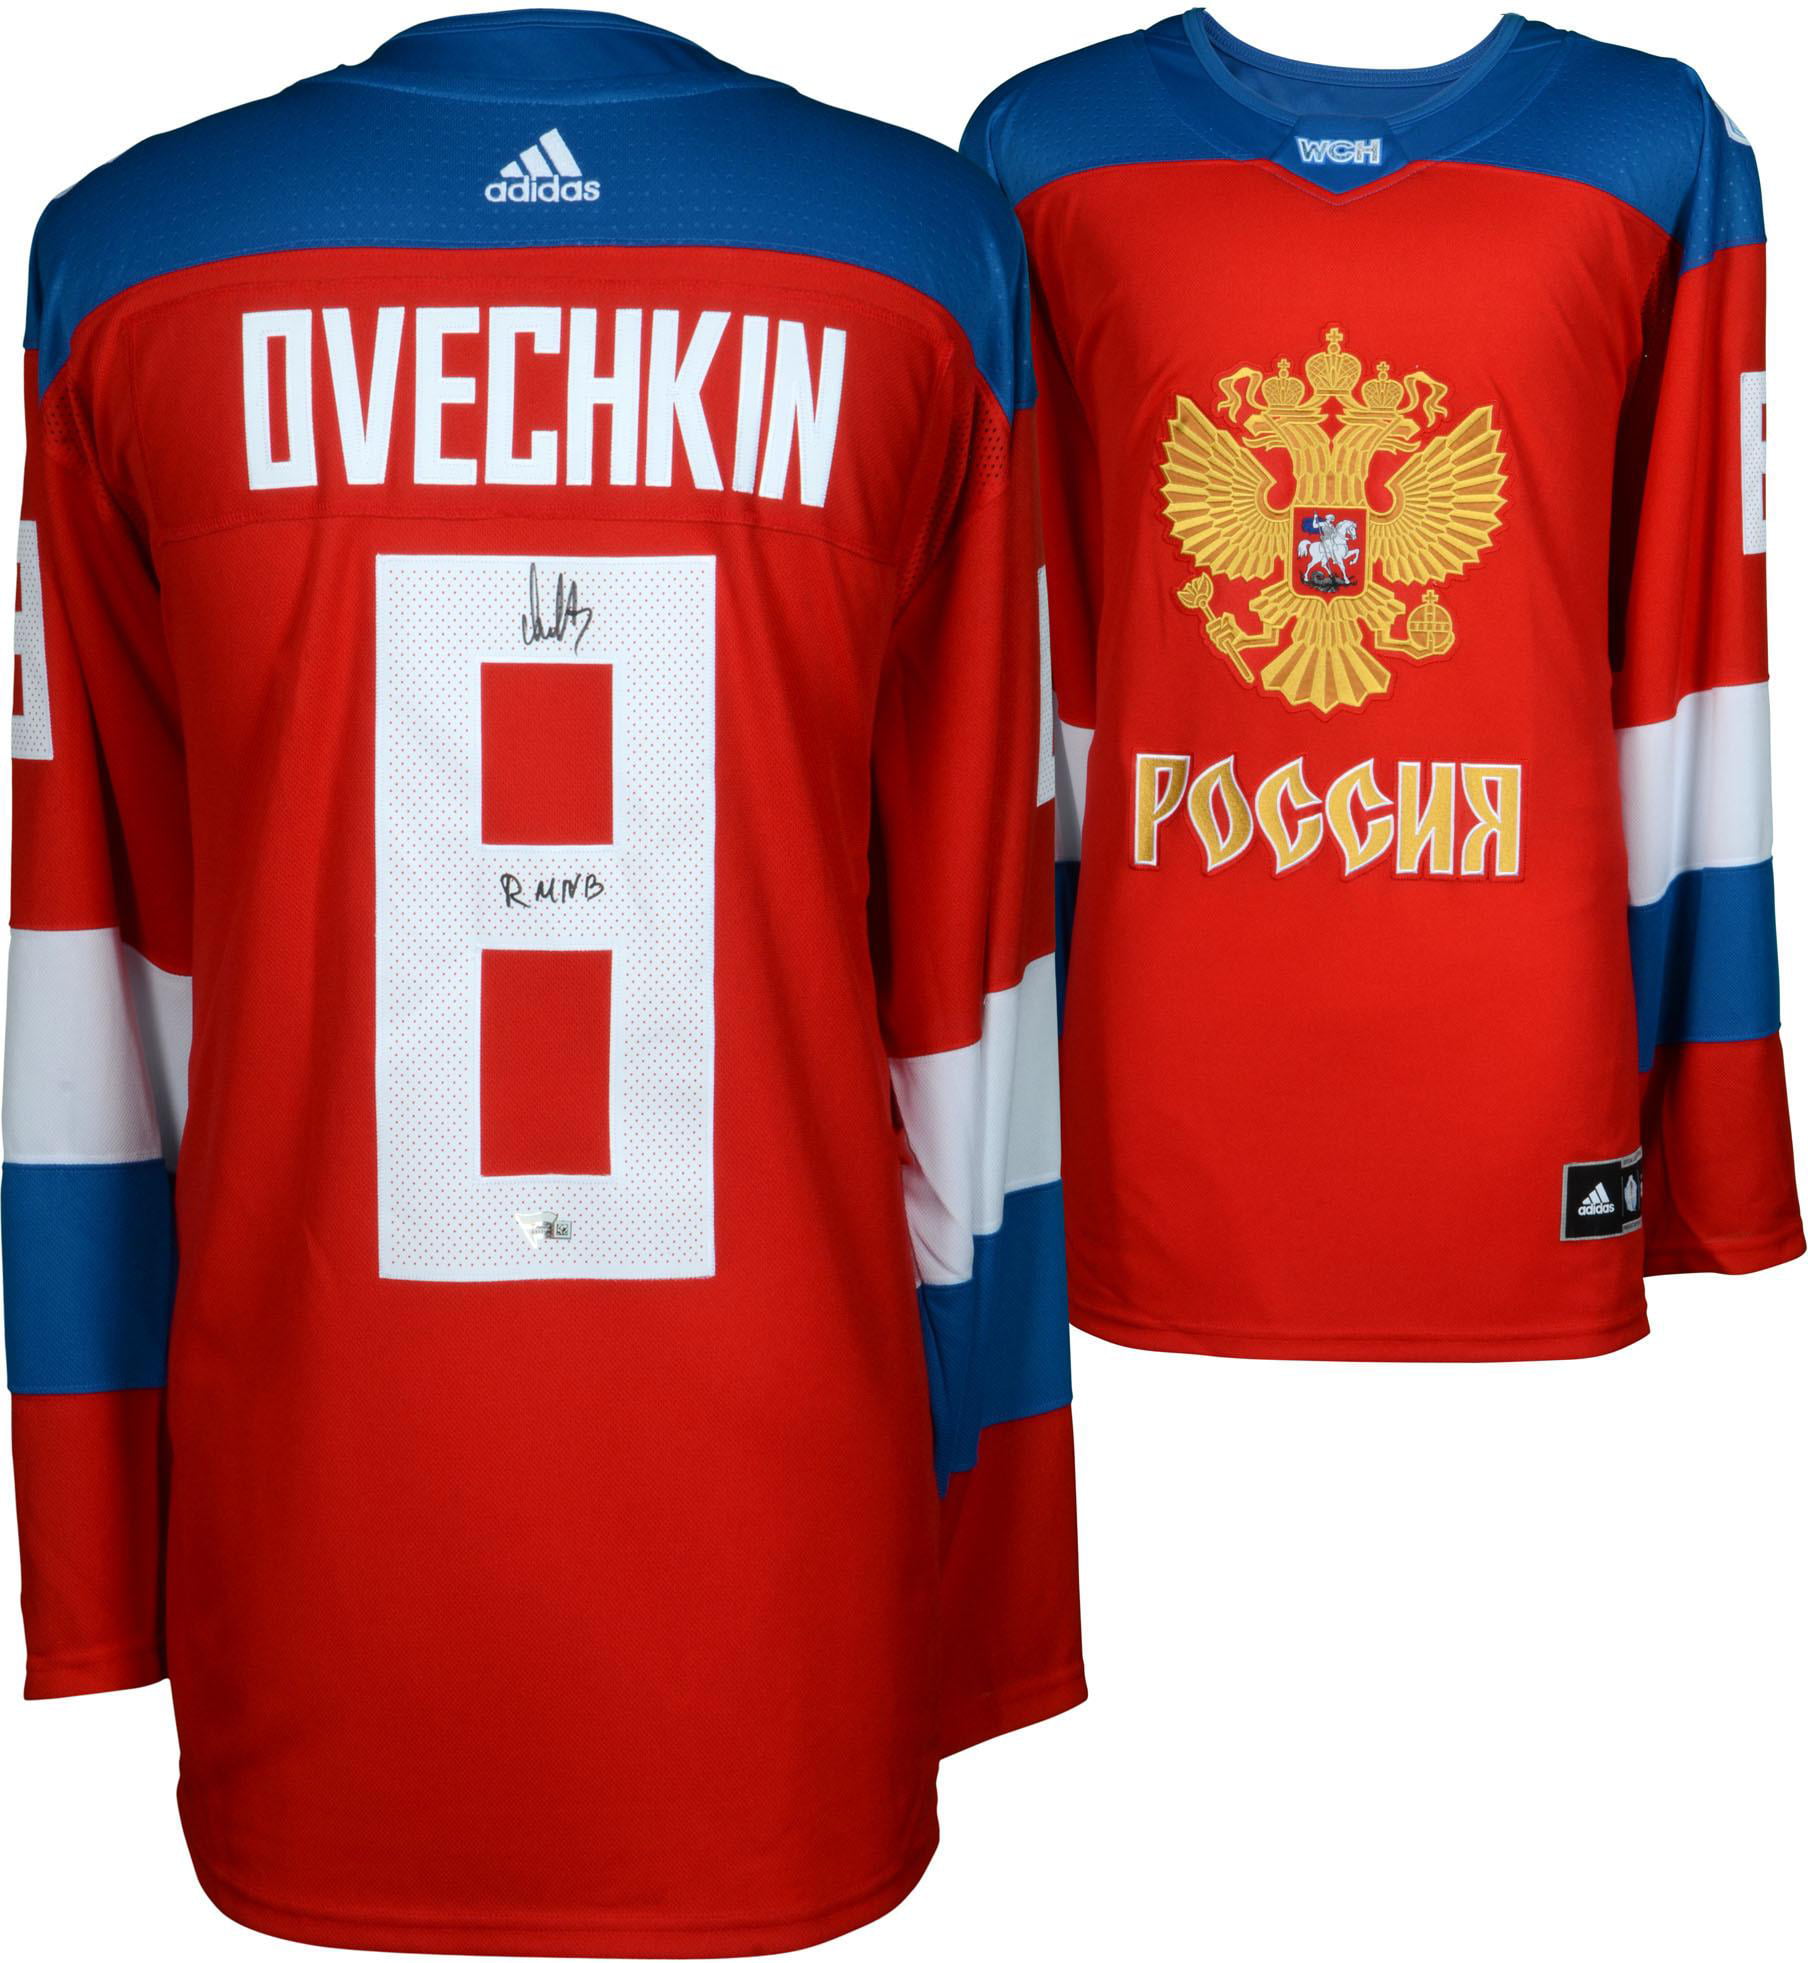 ovechkin autographed jersey